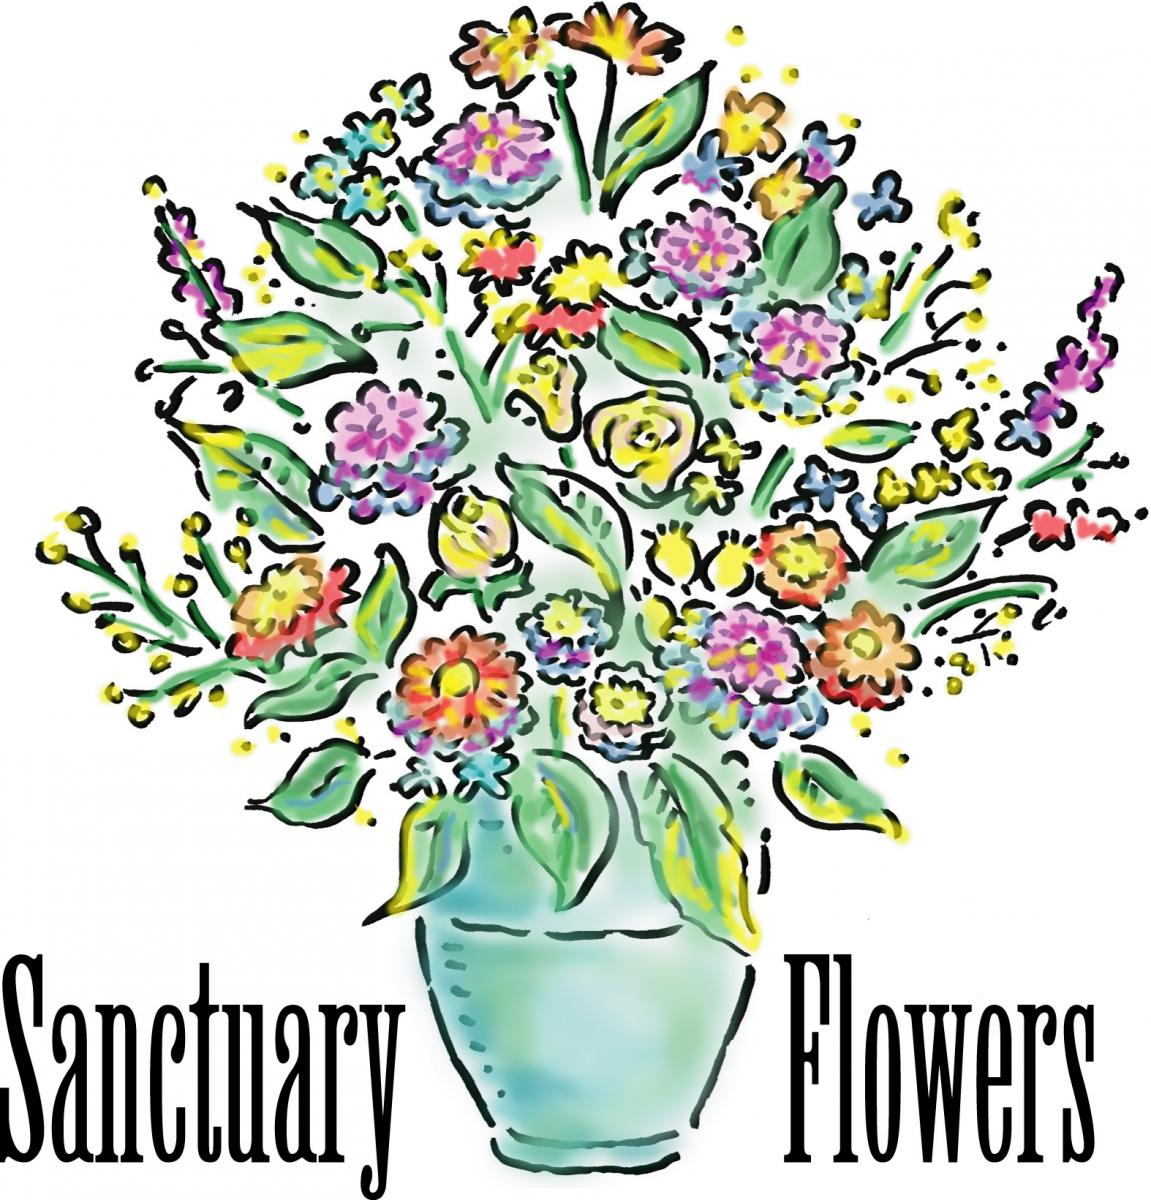 responses clipart of flowers